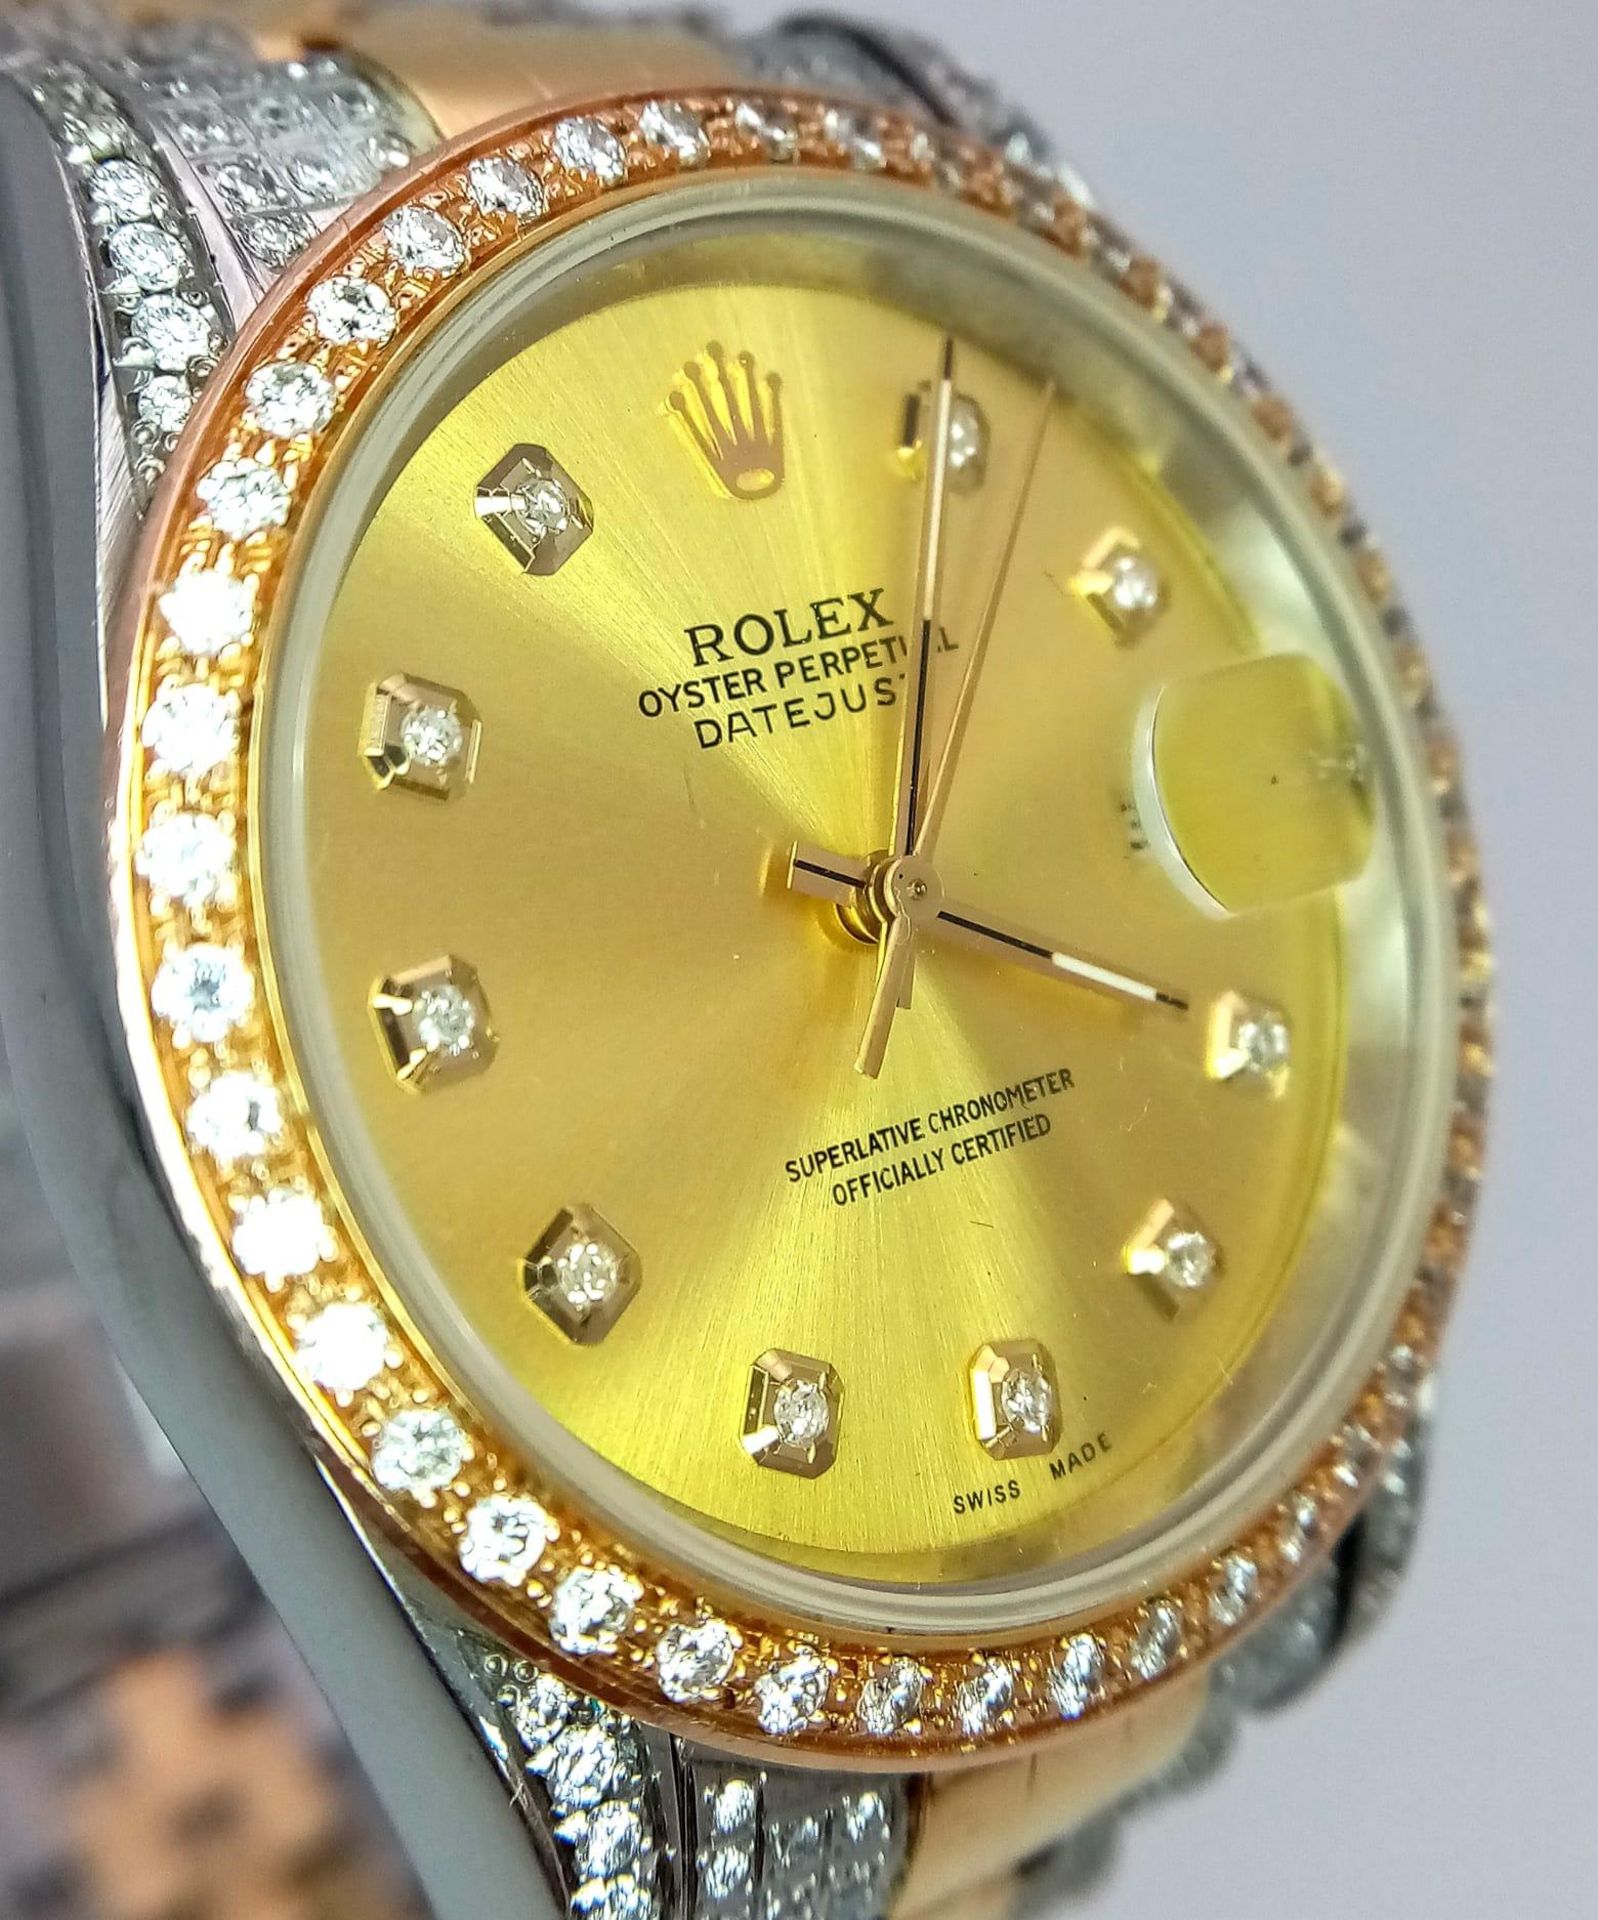 A Rolex Oyster Perpetual Datejust Bi-Metal Diamond Gents Watch. Gold, stainless steel and diamond - Image 7 of 15